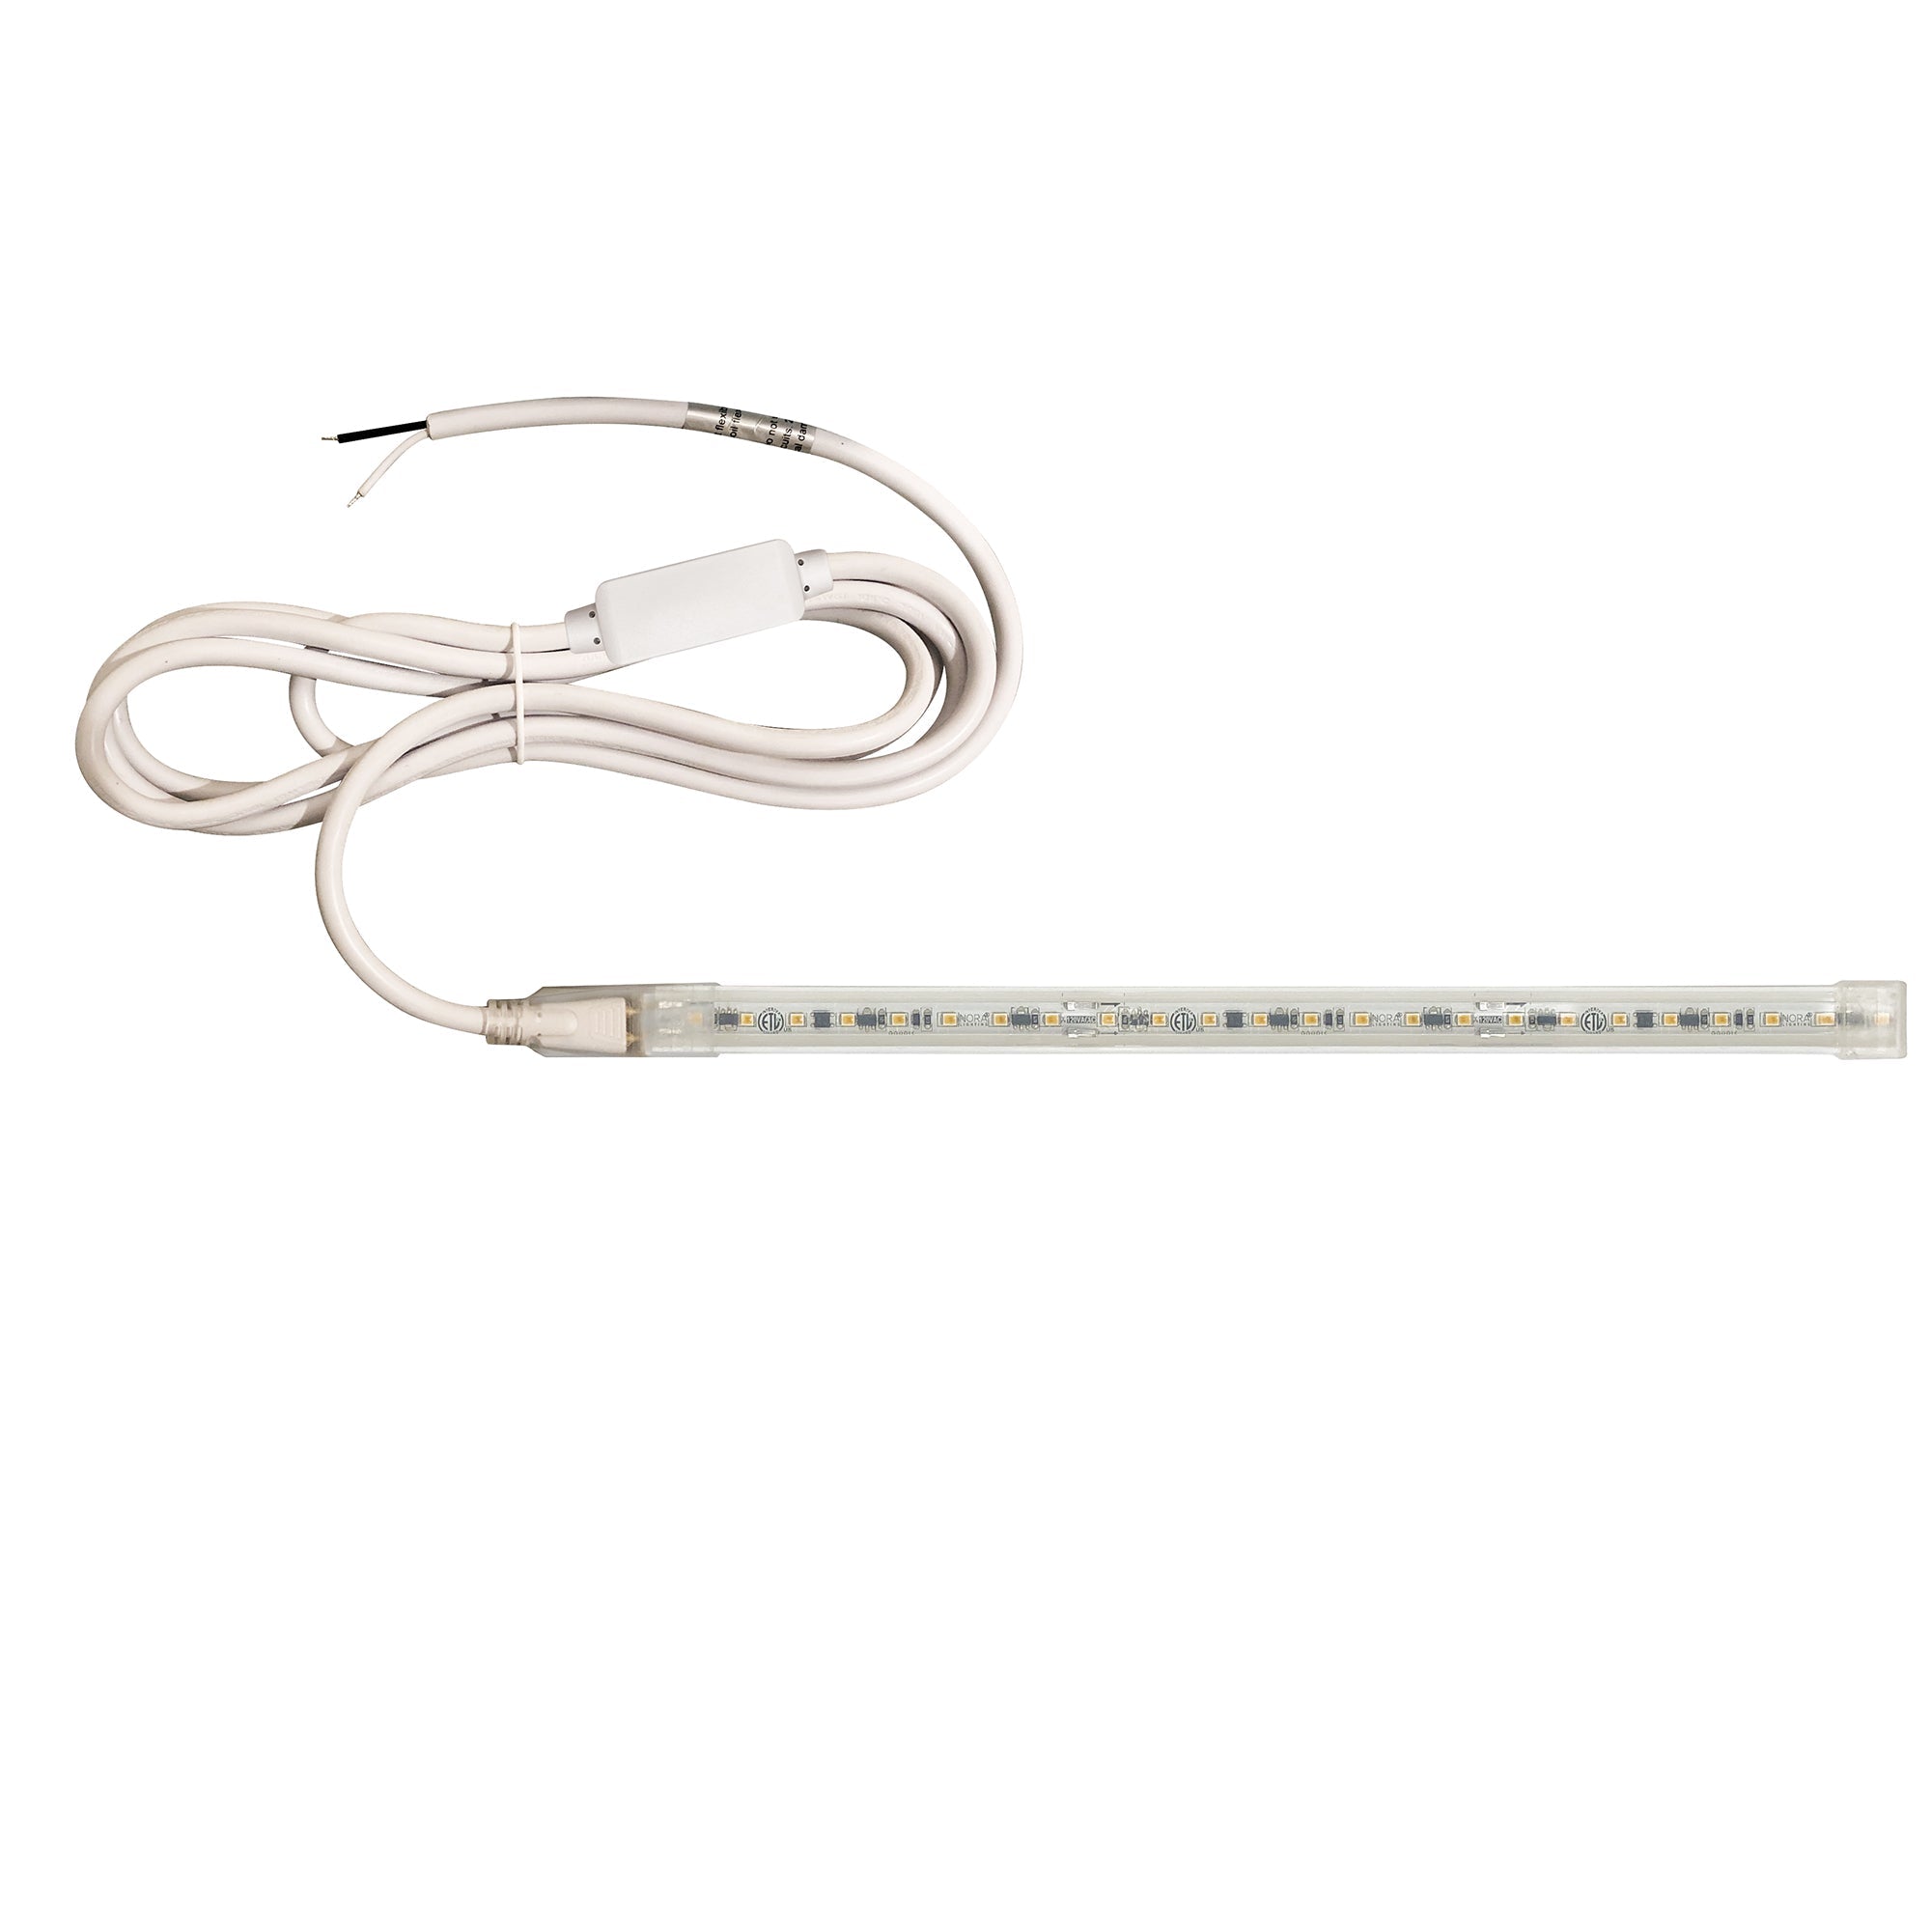 Nora Lighting NUTP13-W44-12-930/HWSP - Accent / Undercabinet - Custom Cut 44-ft 120V Continuous LED Tape Light, 330lm / 3.6W per foot, 3000K, w/ Mounting Clips and 8' Hardwired Power Cord w/ Surge Protector